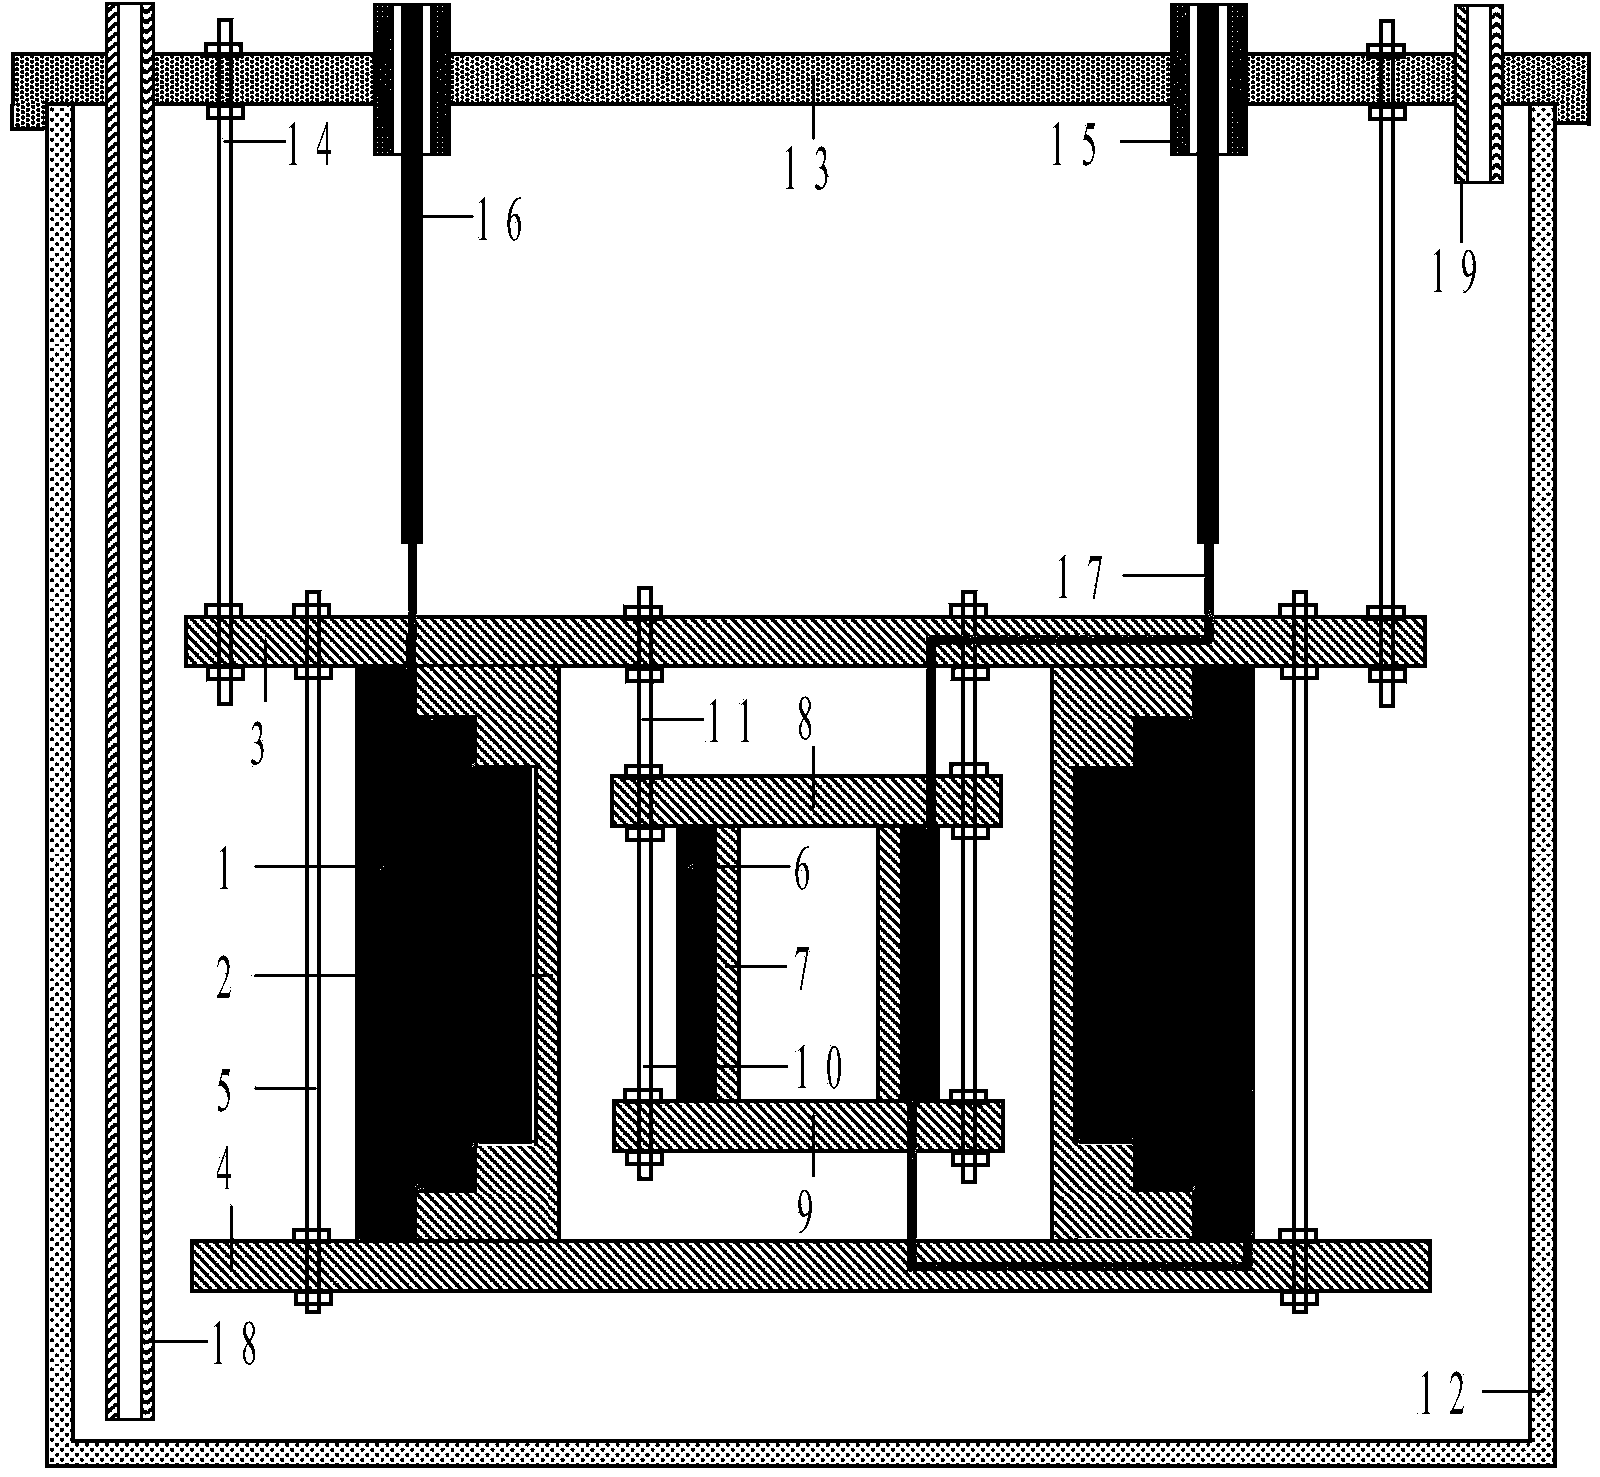 Inductor and resistor compound superconducting reactor